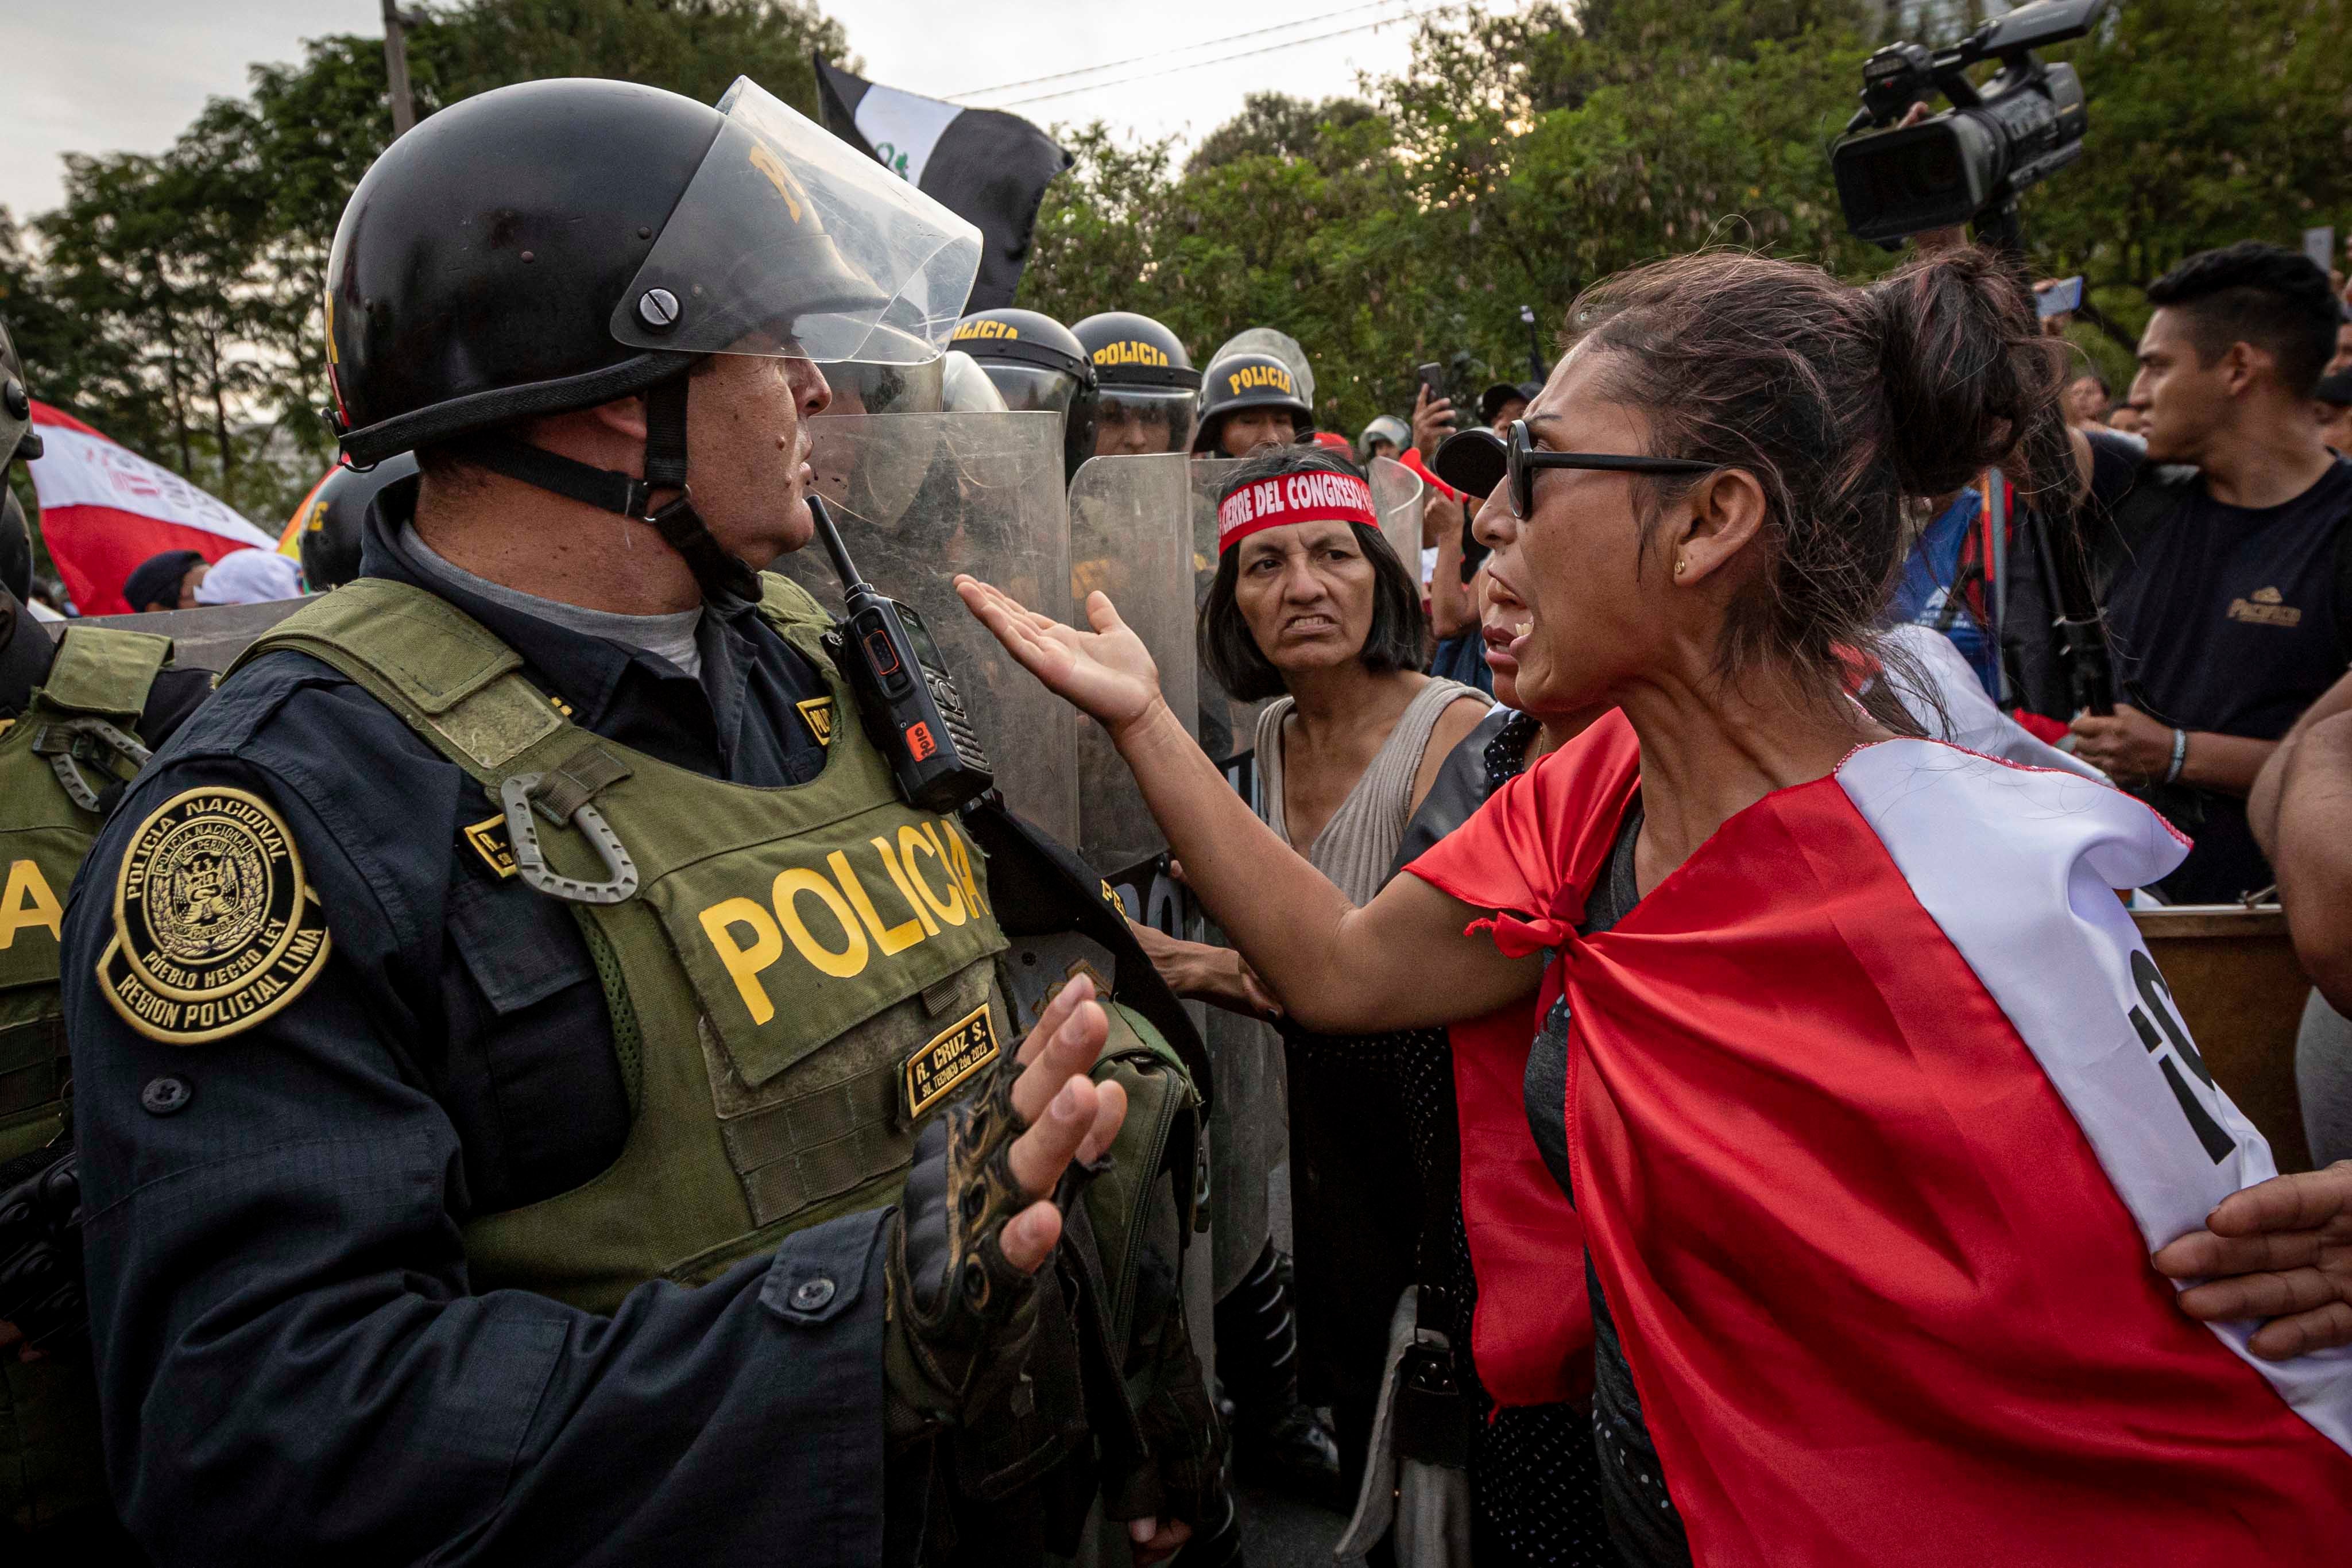 People protest against the government of Peruvian President Dina Boluarte in Lima, Peru, on January 17, 2023. The demonstrators have demanded early elections, the removal of President Boluarte and justice for protesters who have died in clashes with the police. 